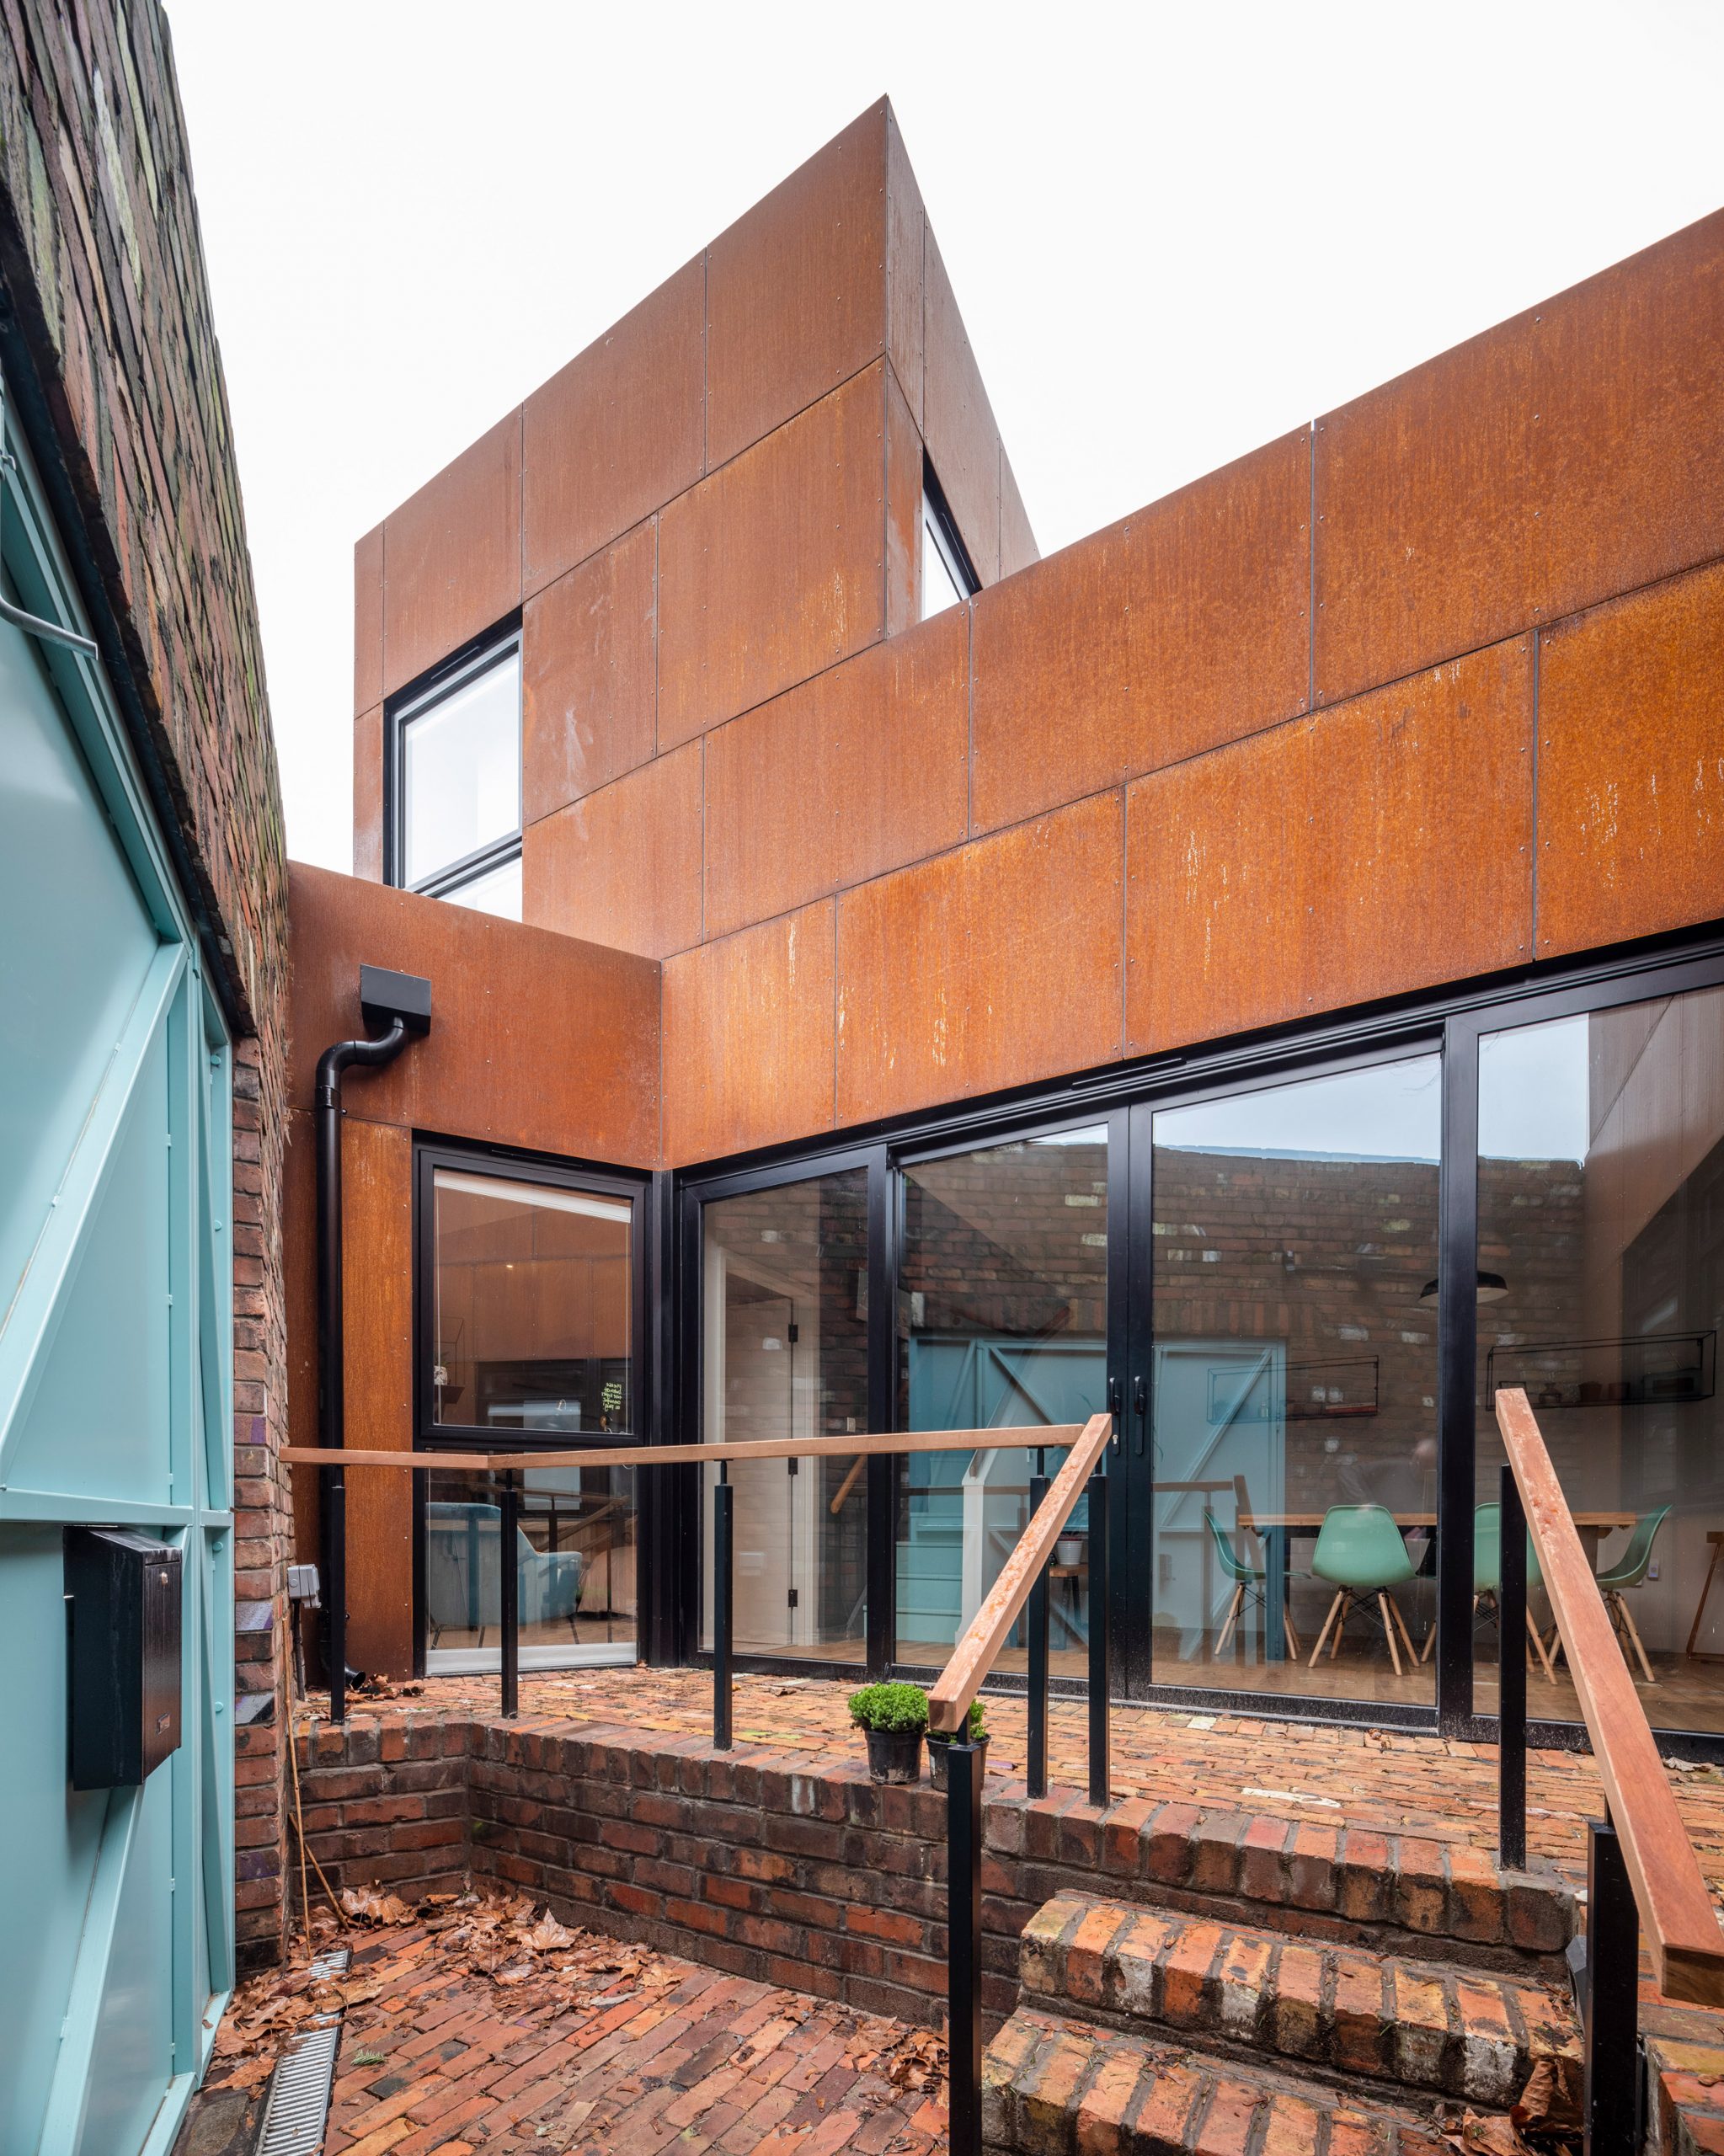 Corten house by Barefoot Architects